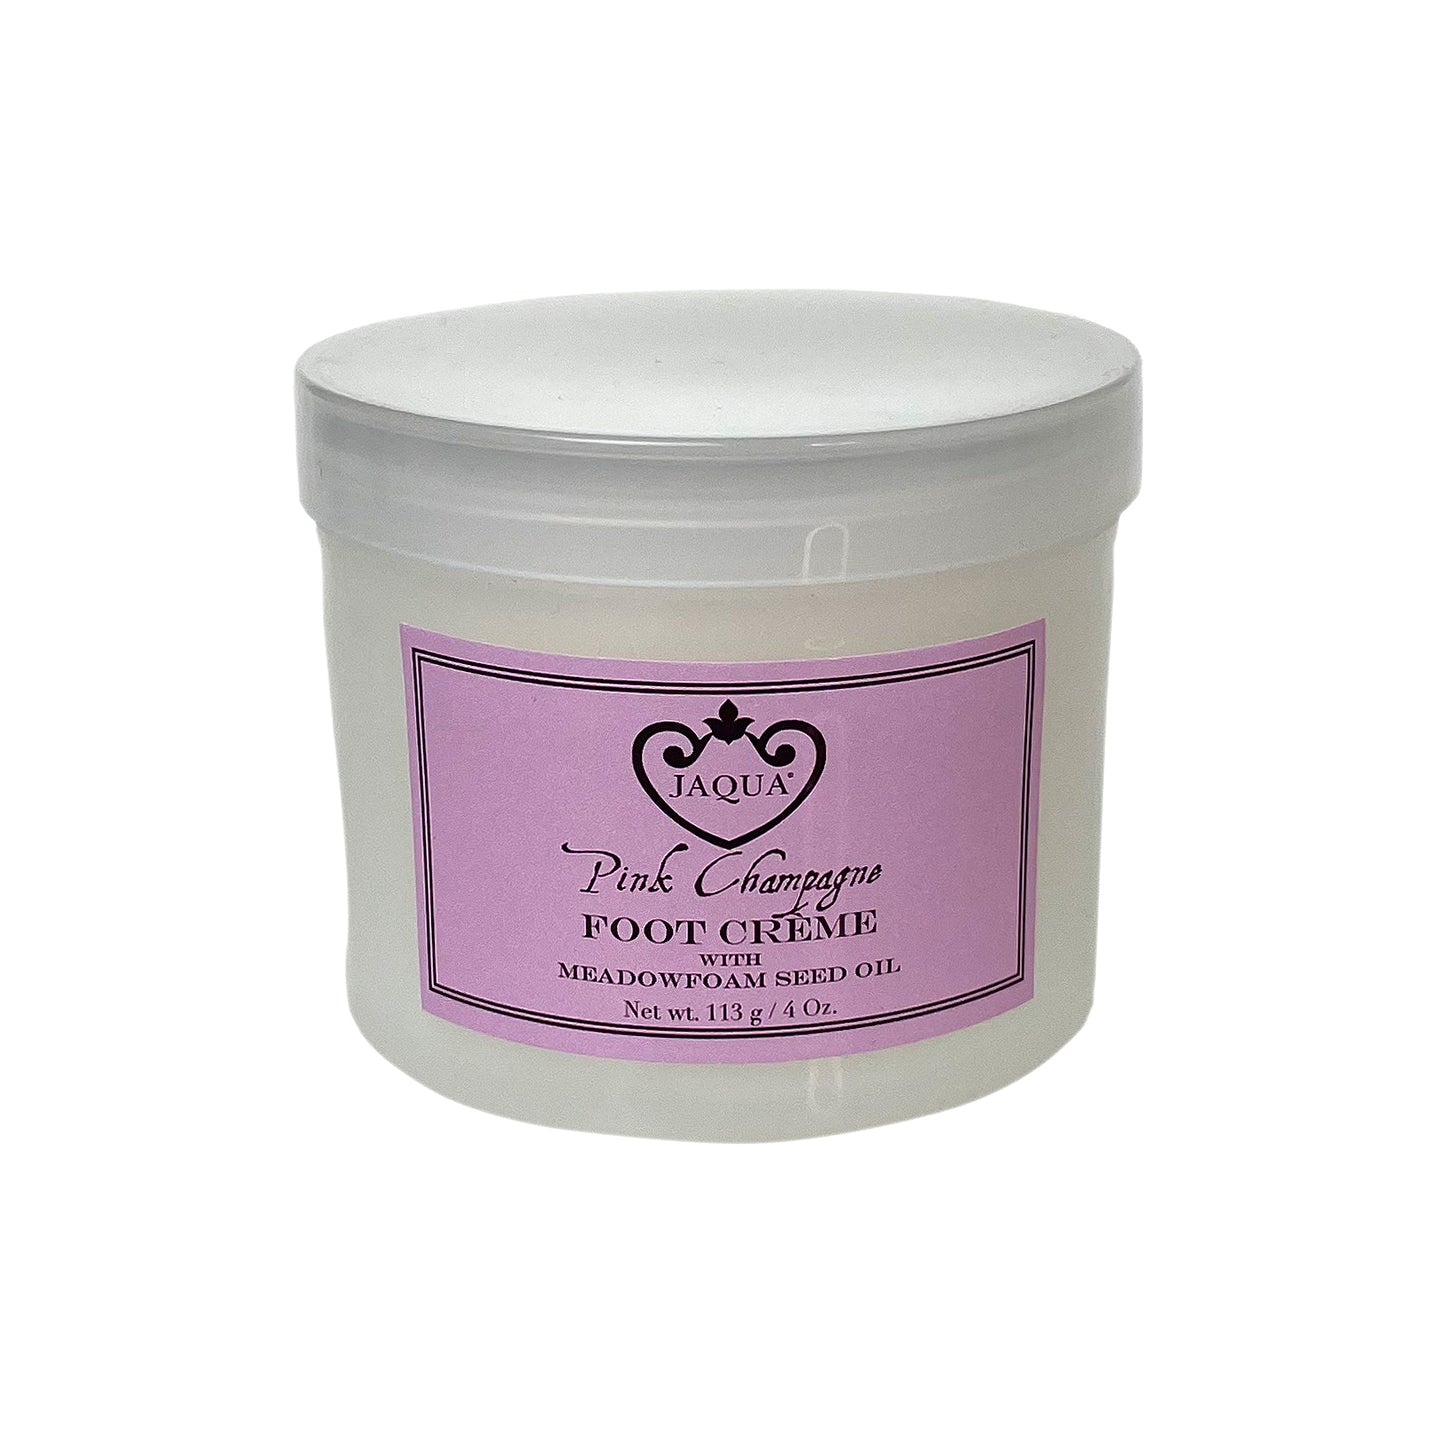 Pink Champagne Foot Crème